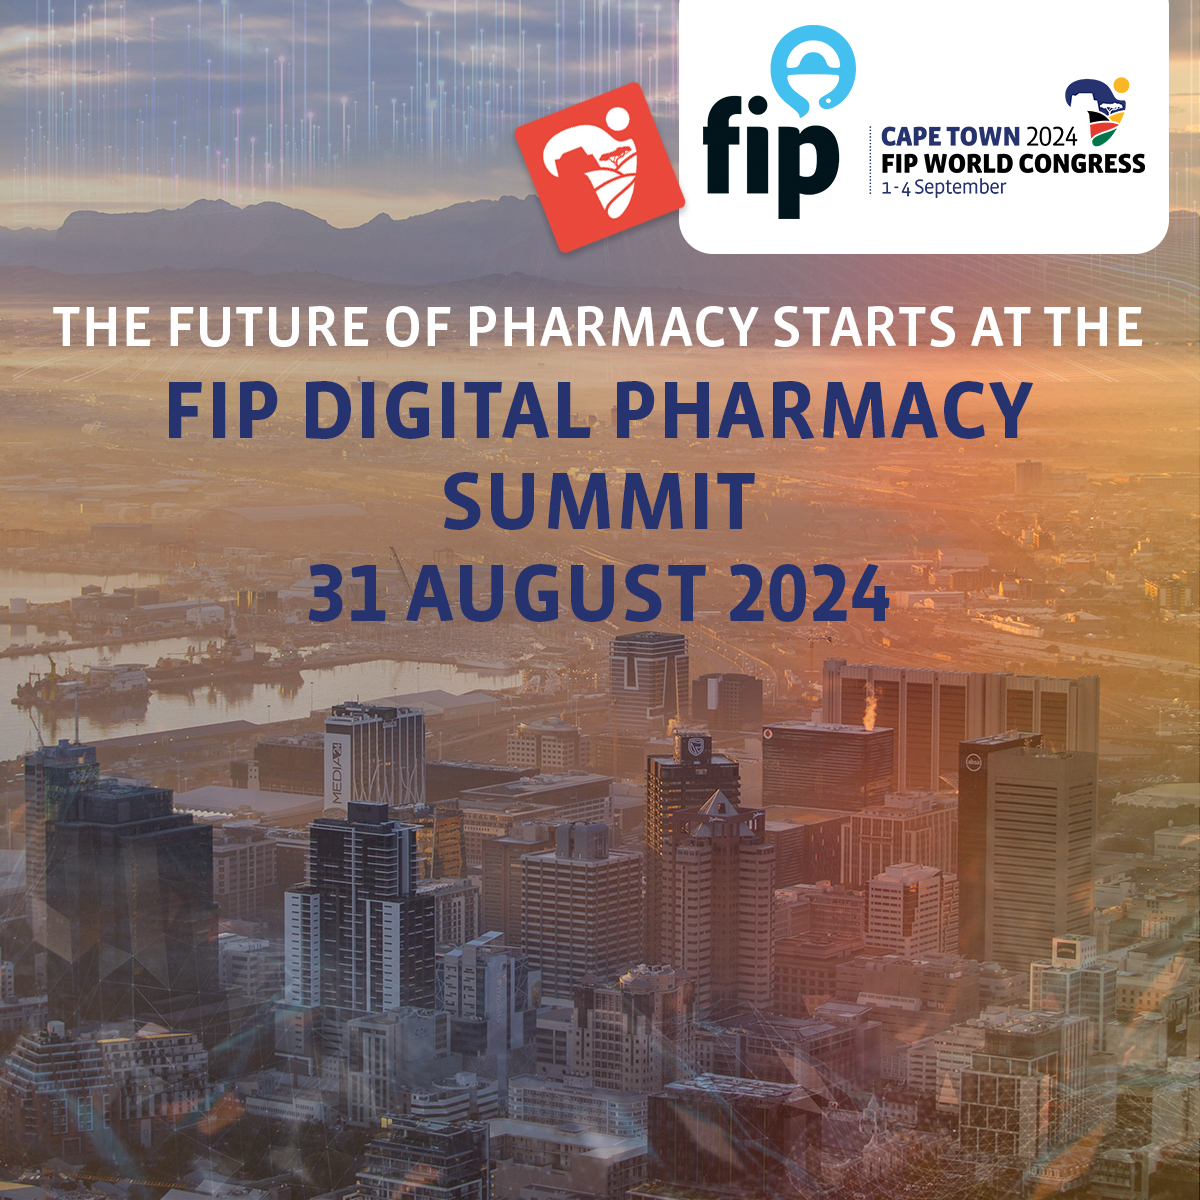 Join us at FIP’s Digital Pharmacy Summit to explore the rapid progress occurring at the crossroads of health care and technology, digital medicine and artificial intelligence. Register now: capetown2024.fip.org/programme-sess…